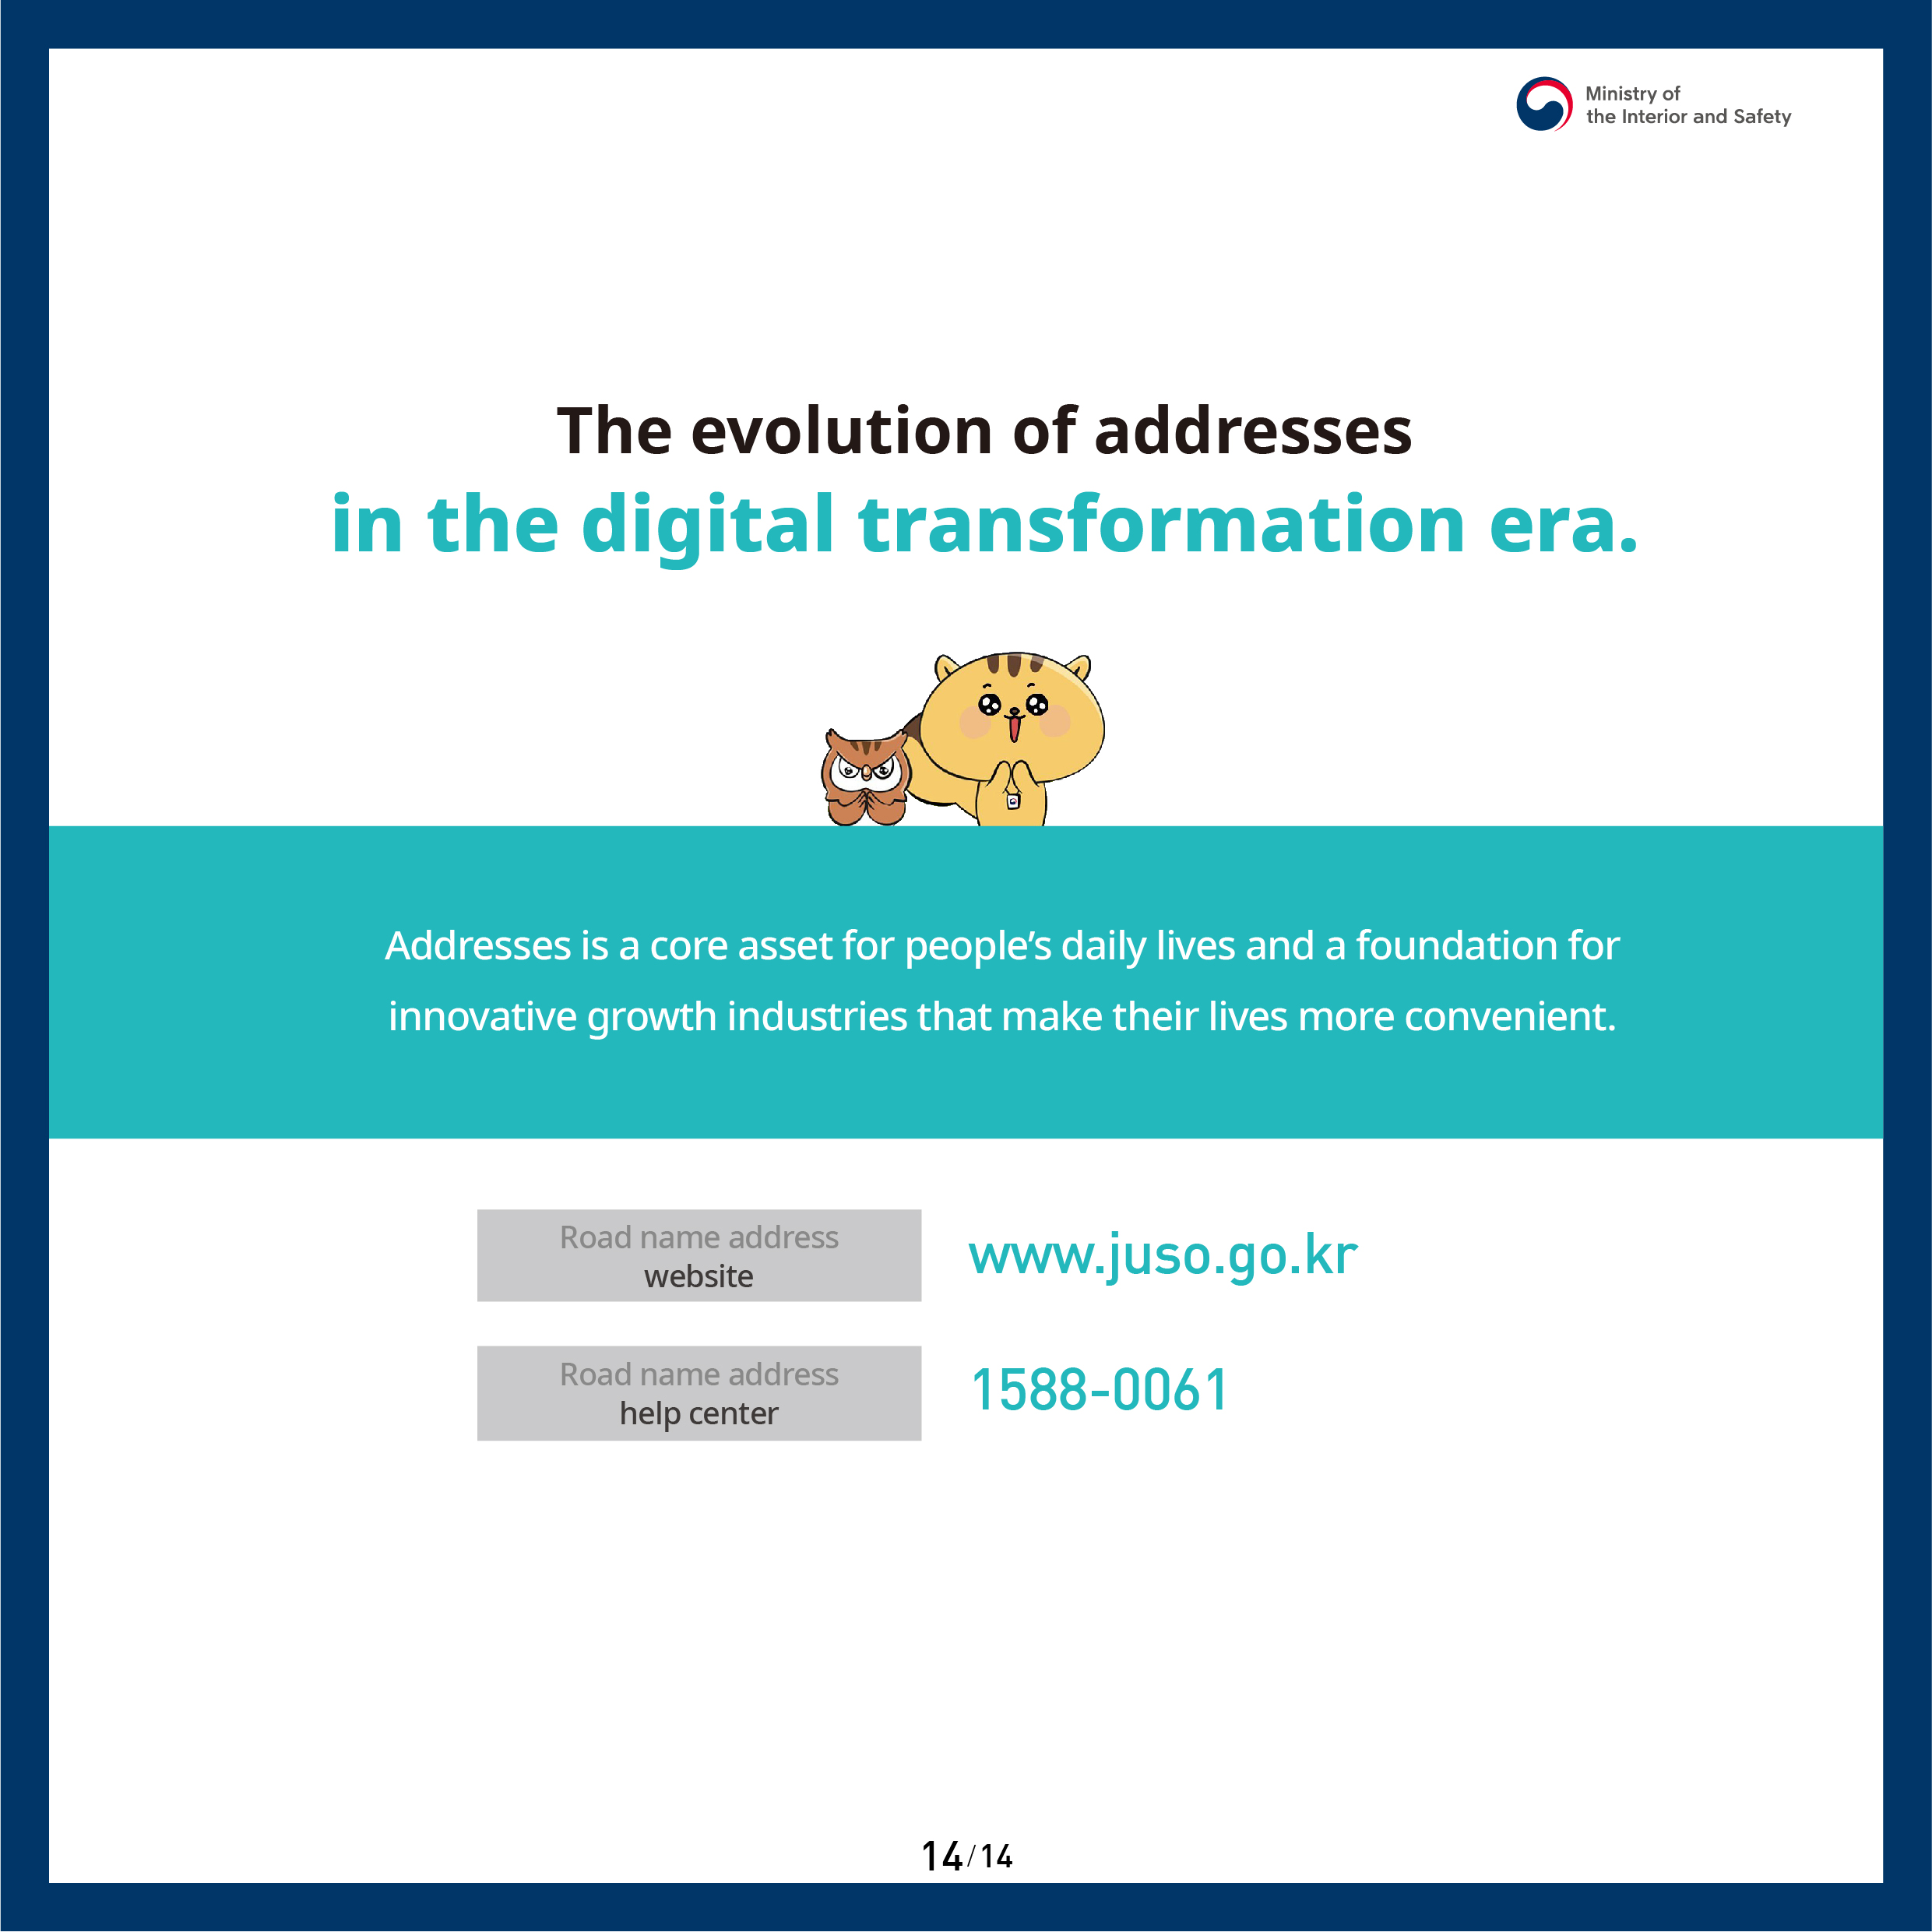 The evolution of addresses in the digital transformation era. Addresses is a core asset for people's daily lives and a foundation for innovative growth industries that make their lives more convenient. Road name address website: www.juso.go.kr Road name address help center: 1588-0061